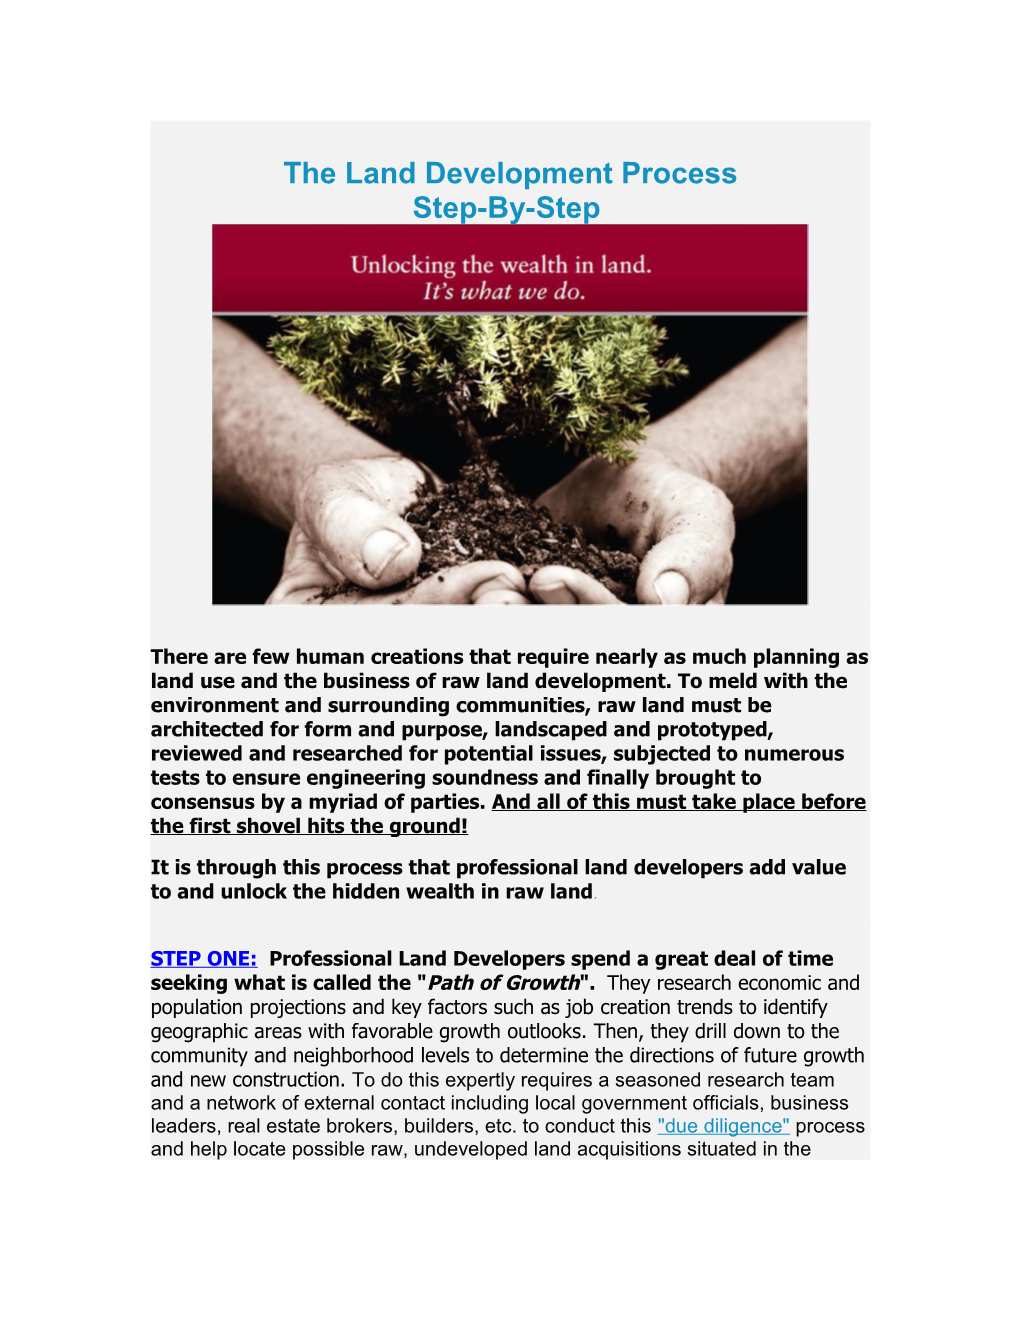 The Land Development Process Step-By-Step